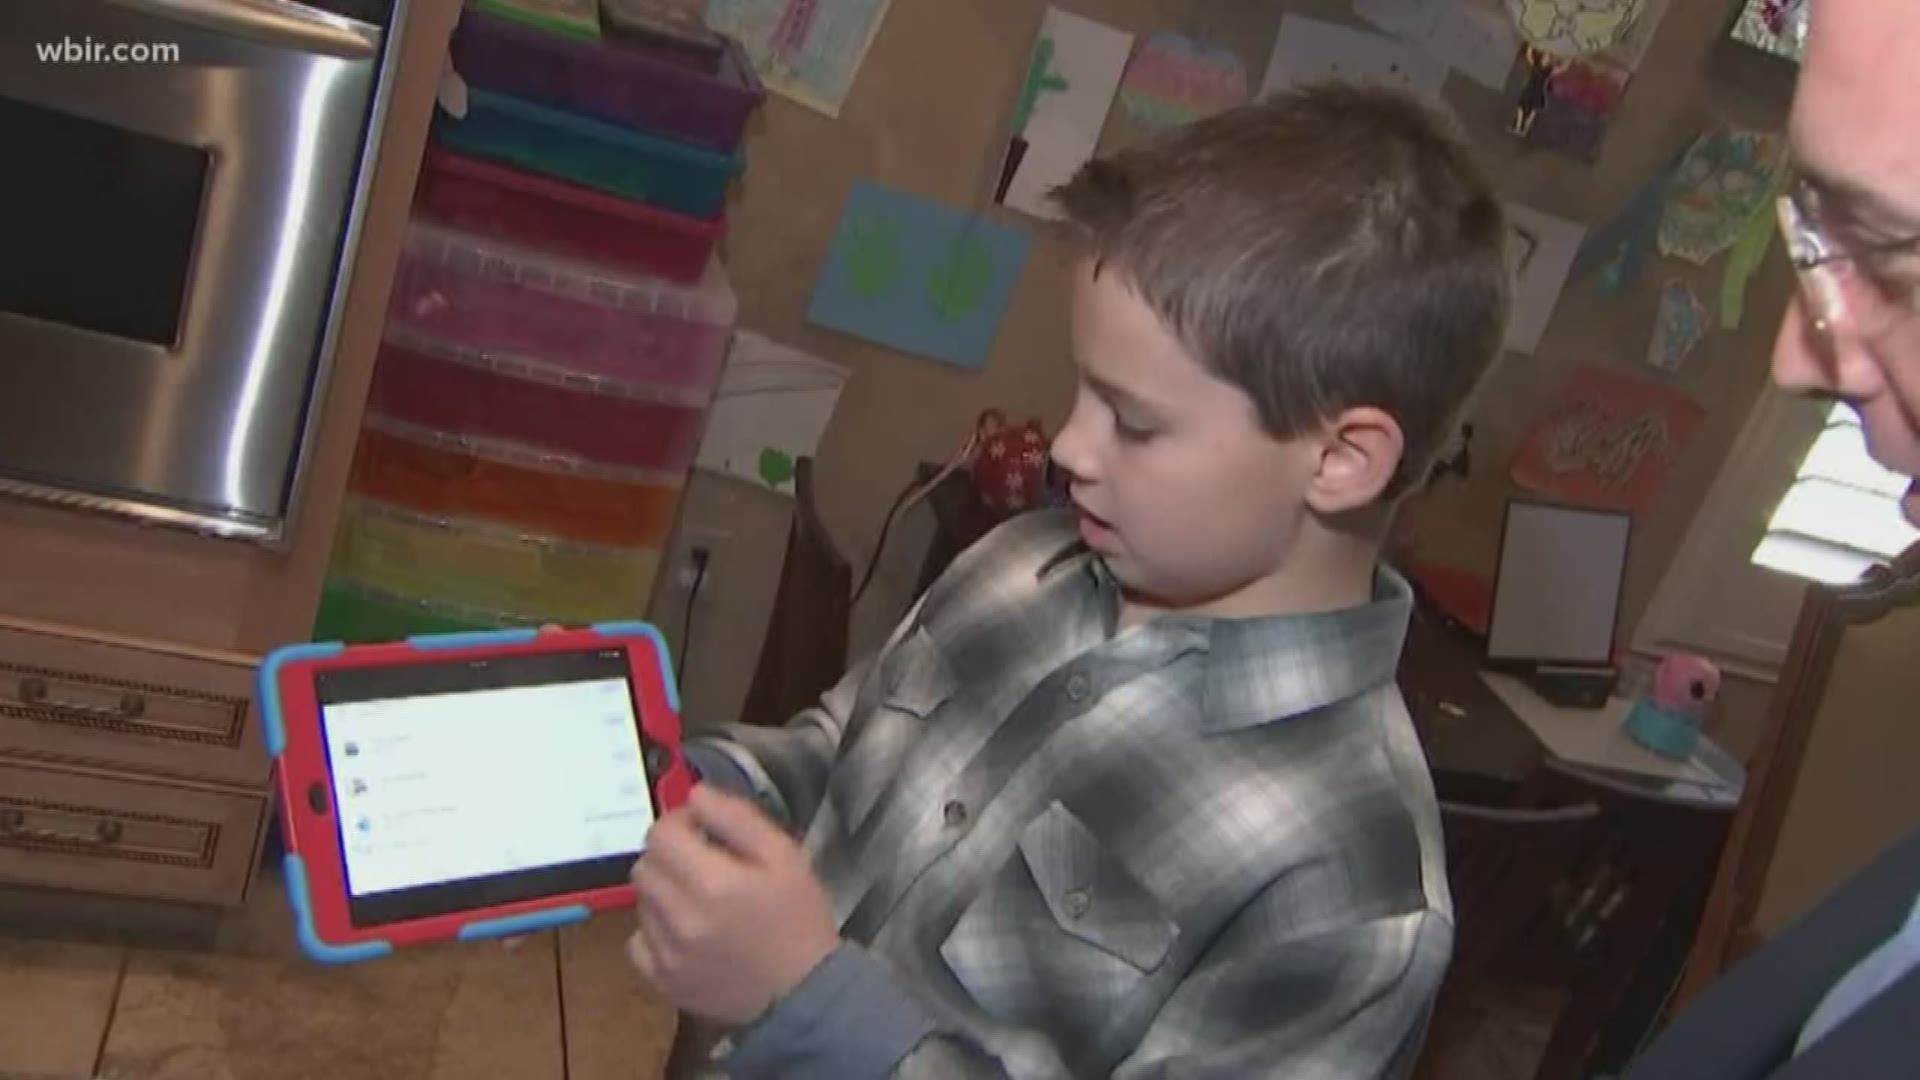 It's allowance... in 2020. The app allows kids to earn their allowance through chores, which they can keep or invest.